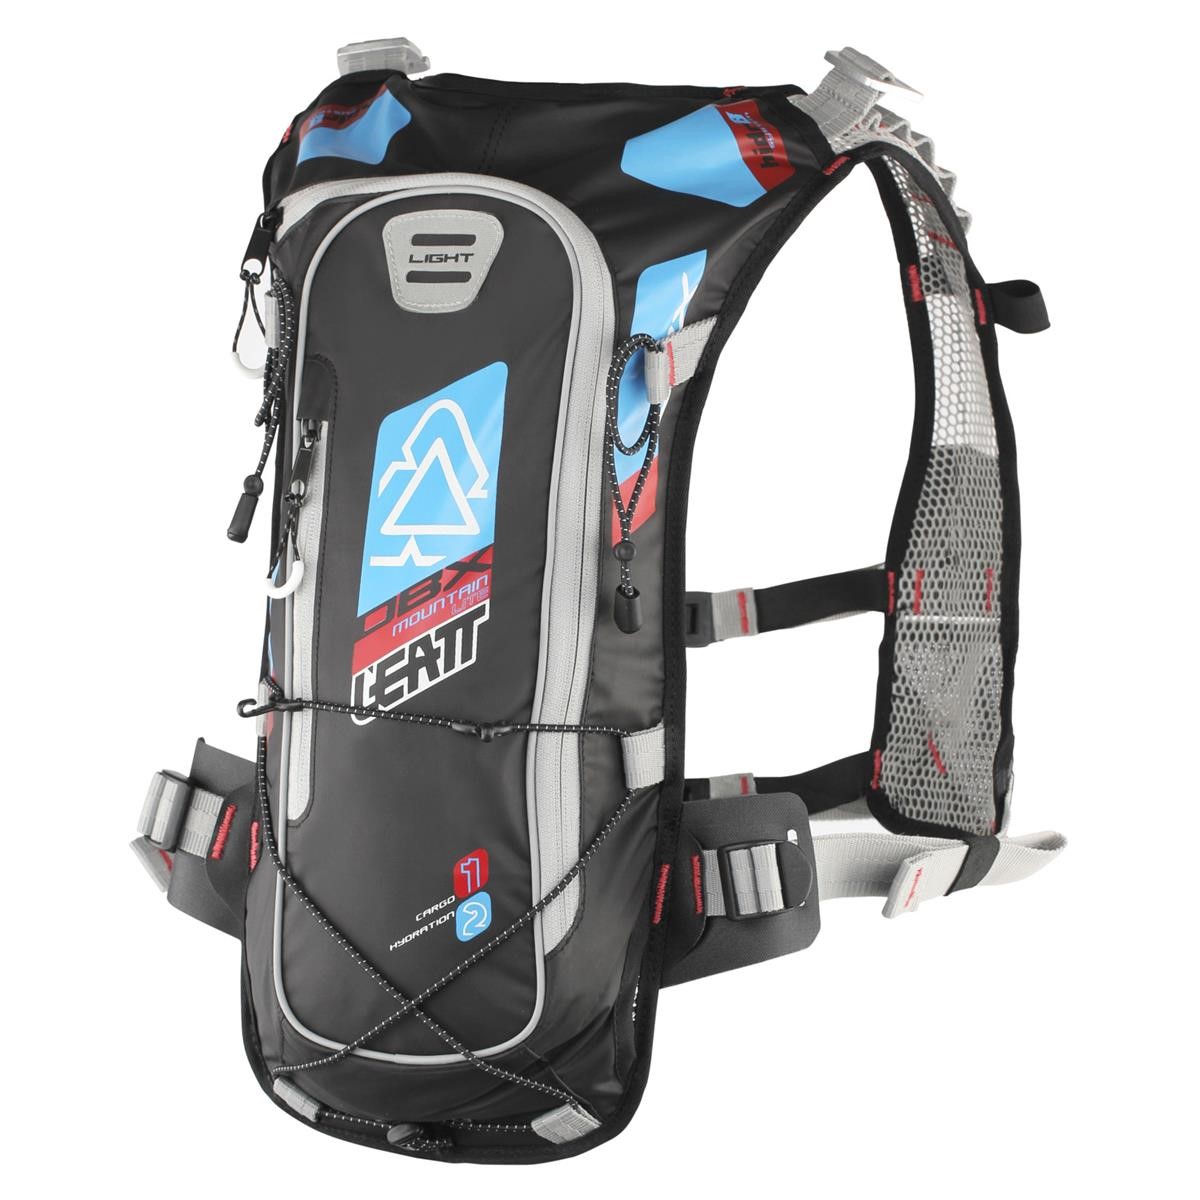 Leatt Hydration Pack Mountain Lite WP 2.0 DBX Incl. Back Protector, Blue/Black/Red, 1 L